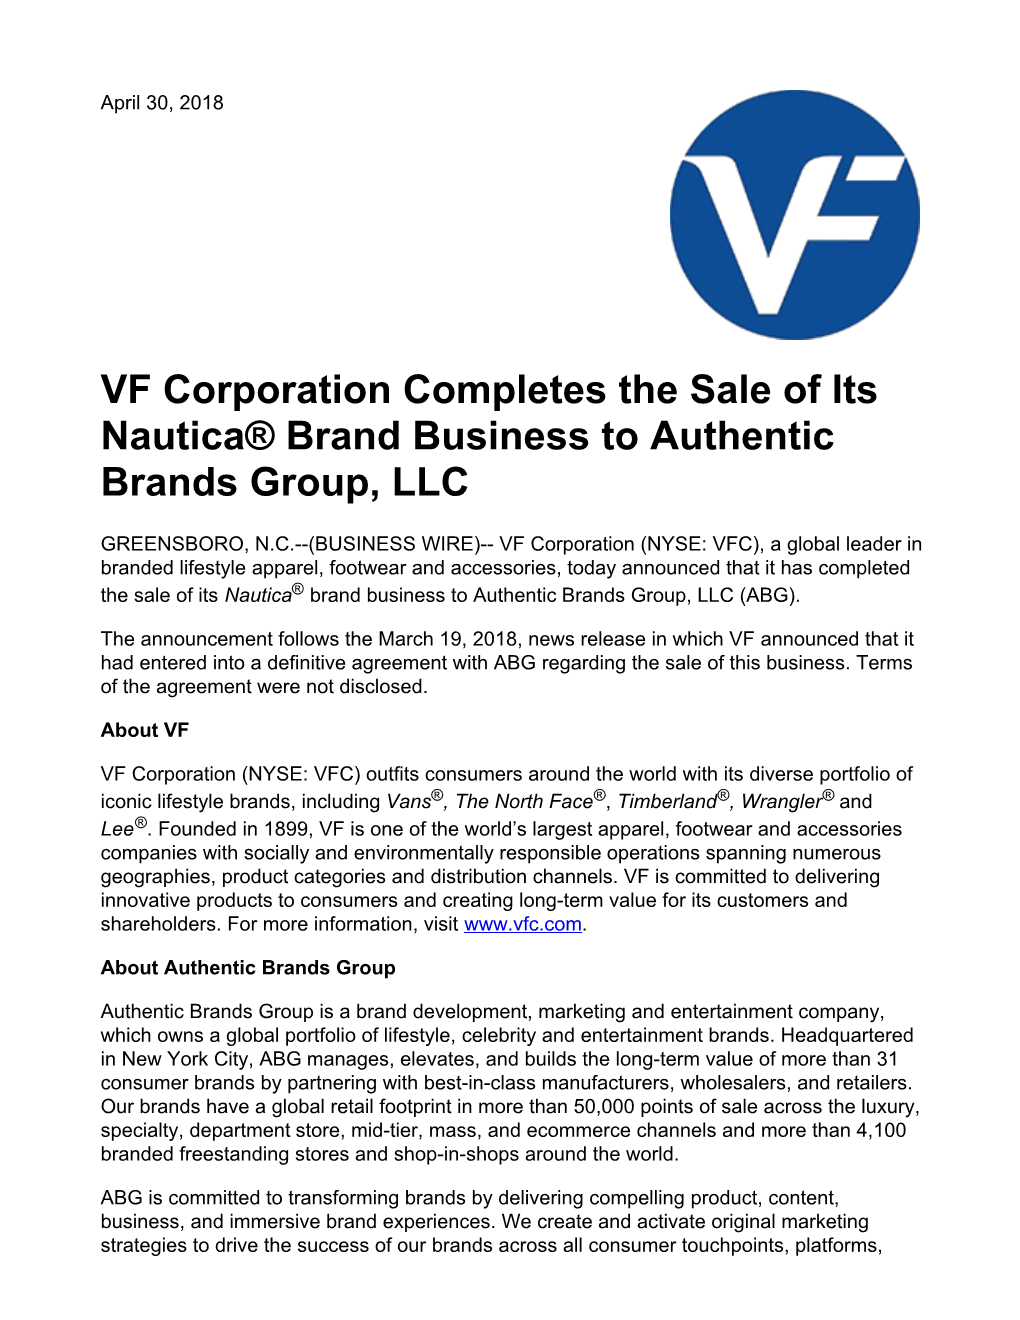 VF Corporation Completes the Sale of Its Nautica® Brand Business to Authentic Brands Group, LLC